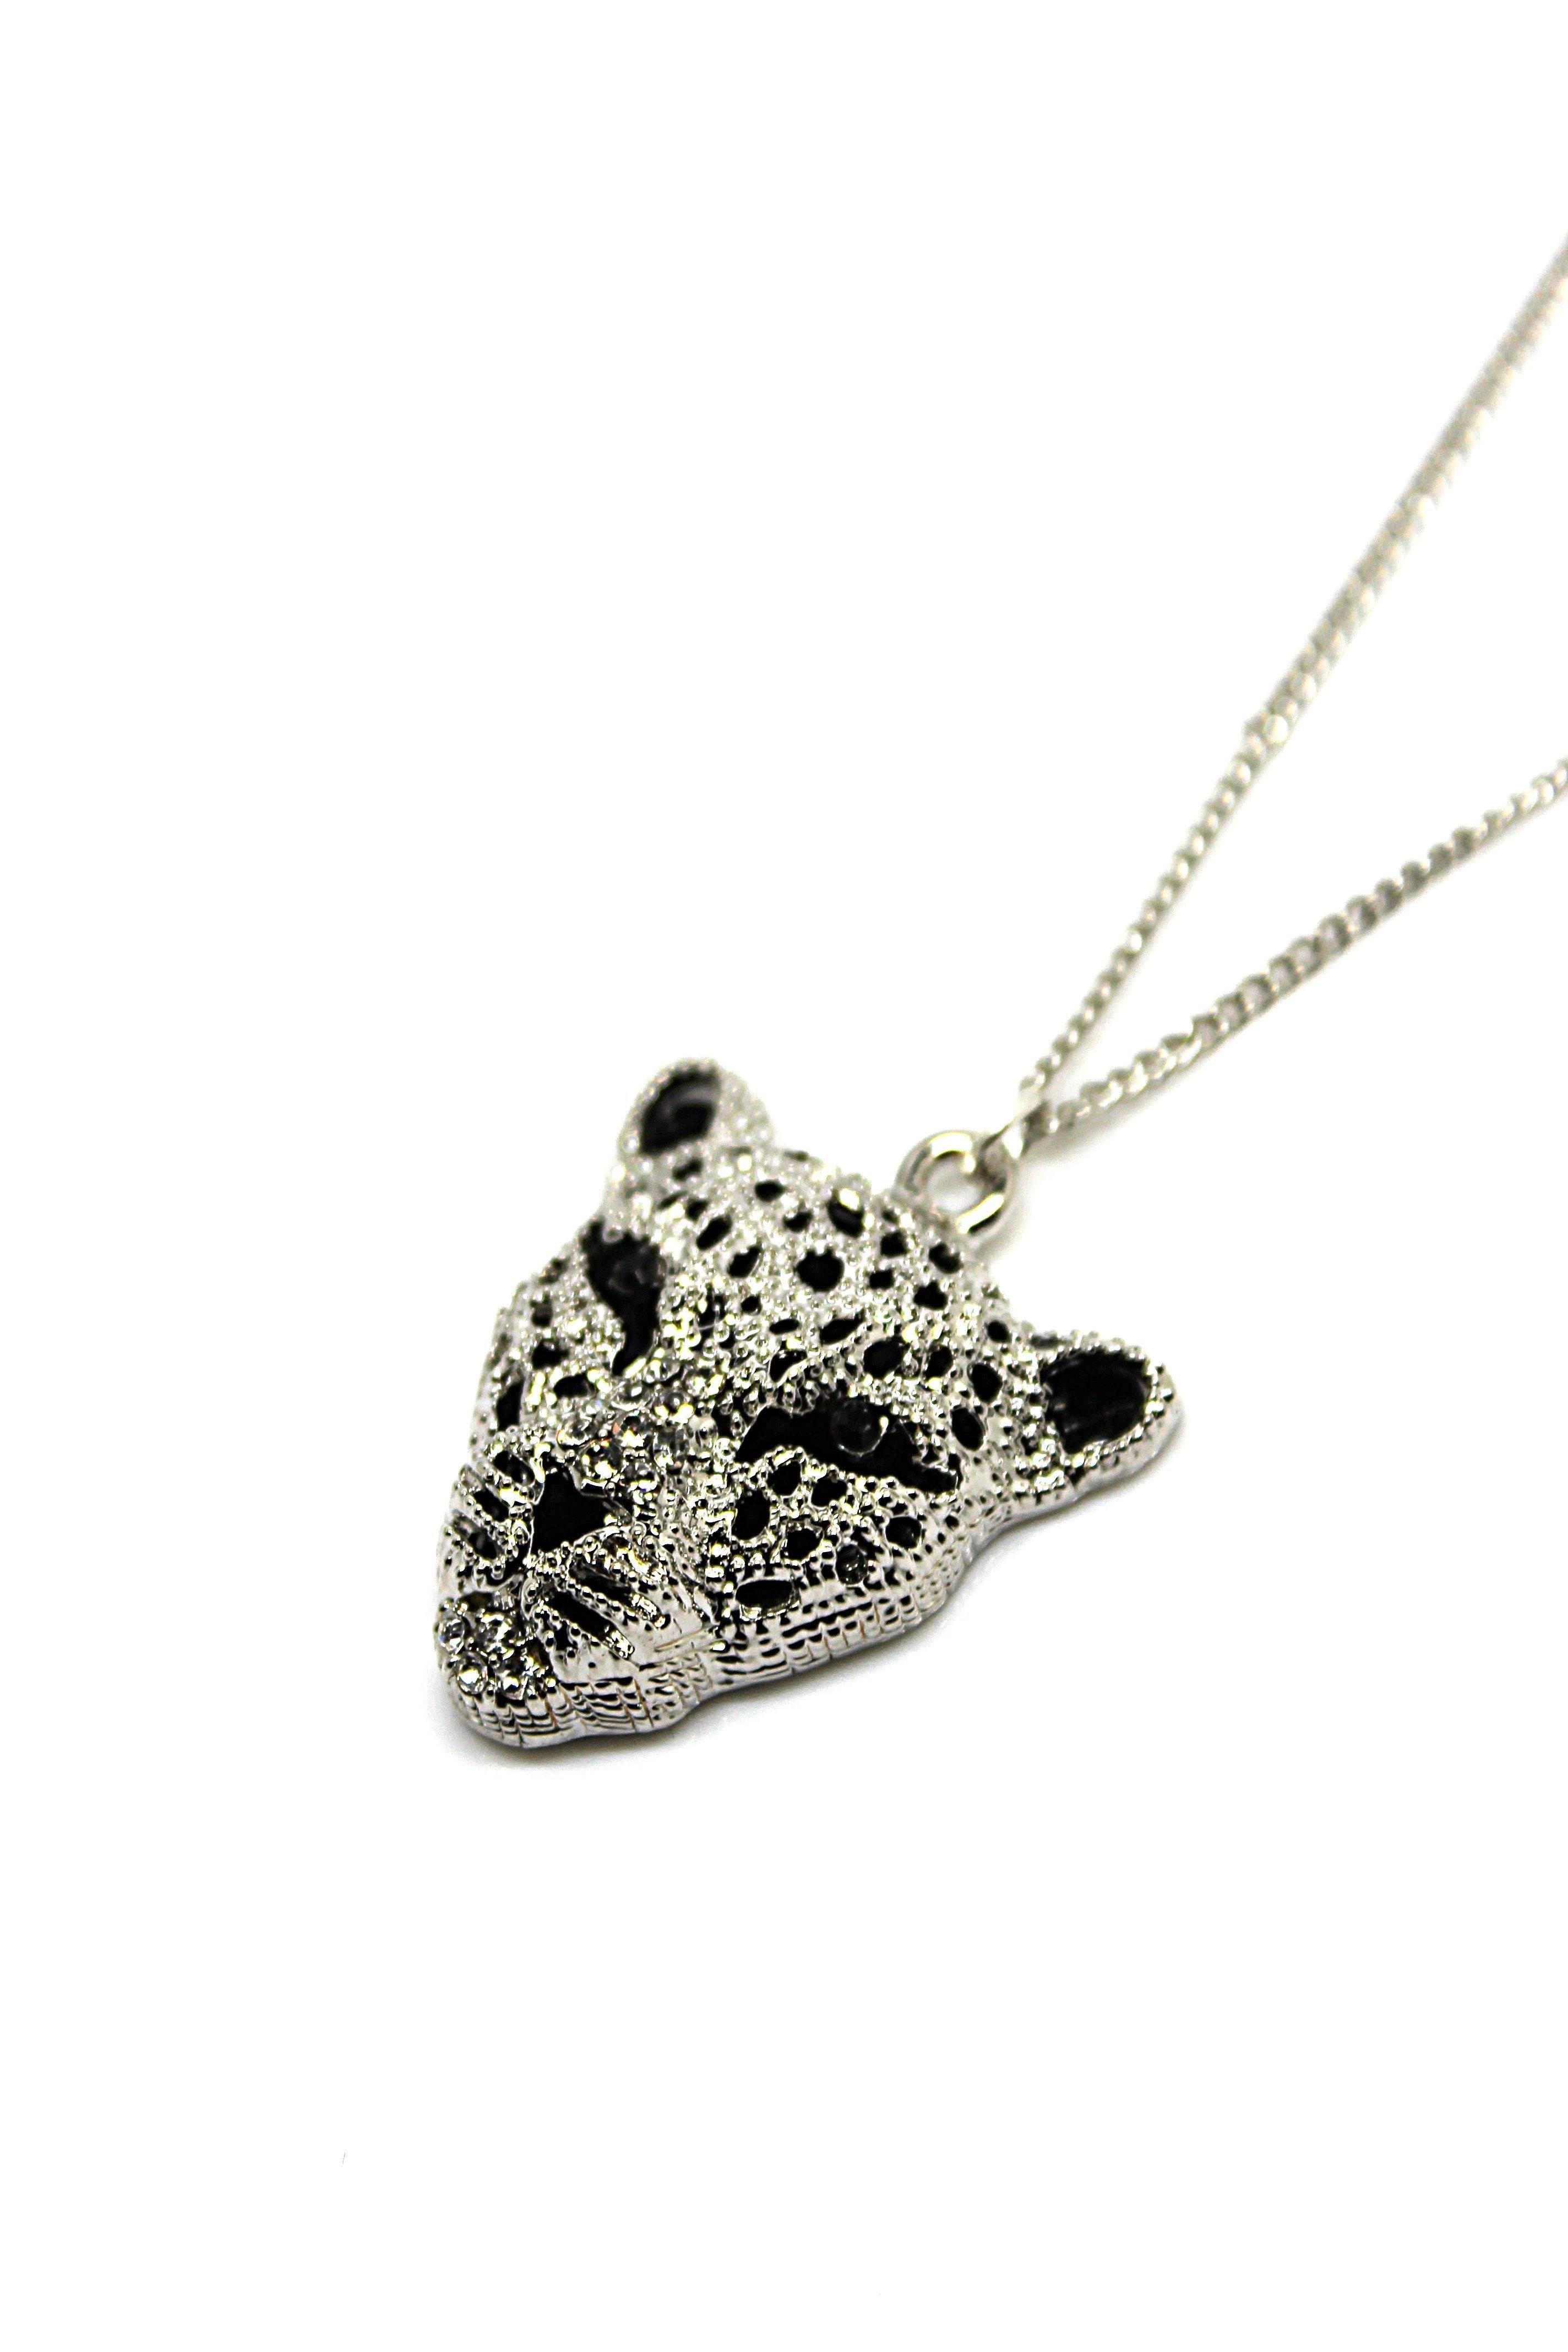 Snow Leopard Necklace - Wildtouch - Wildtouch